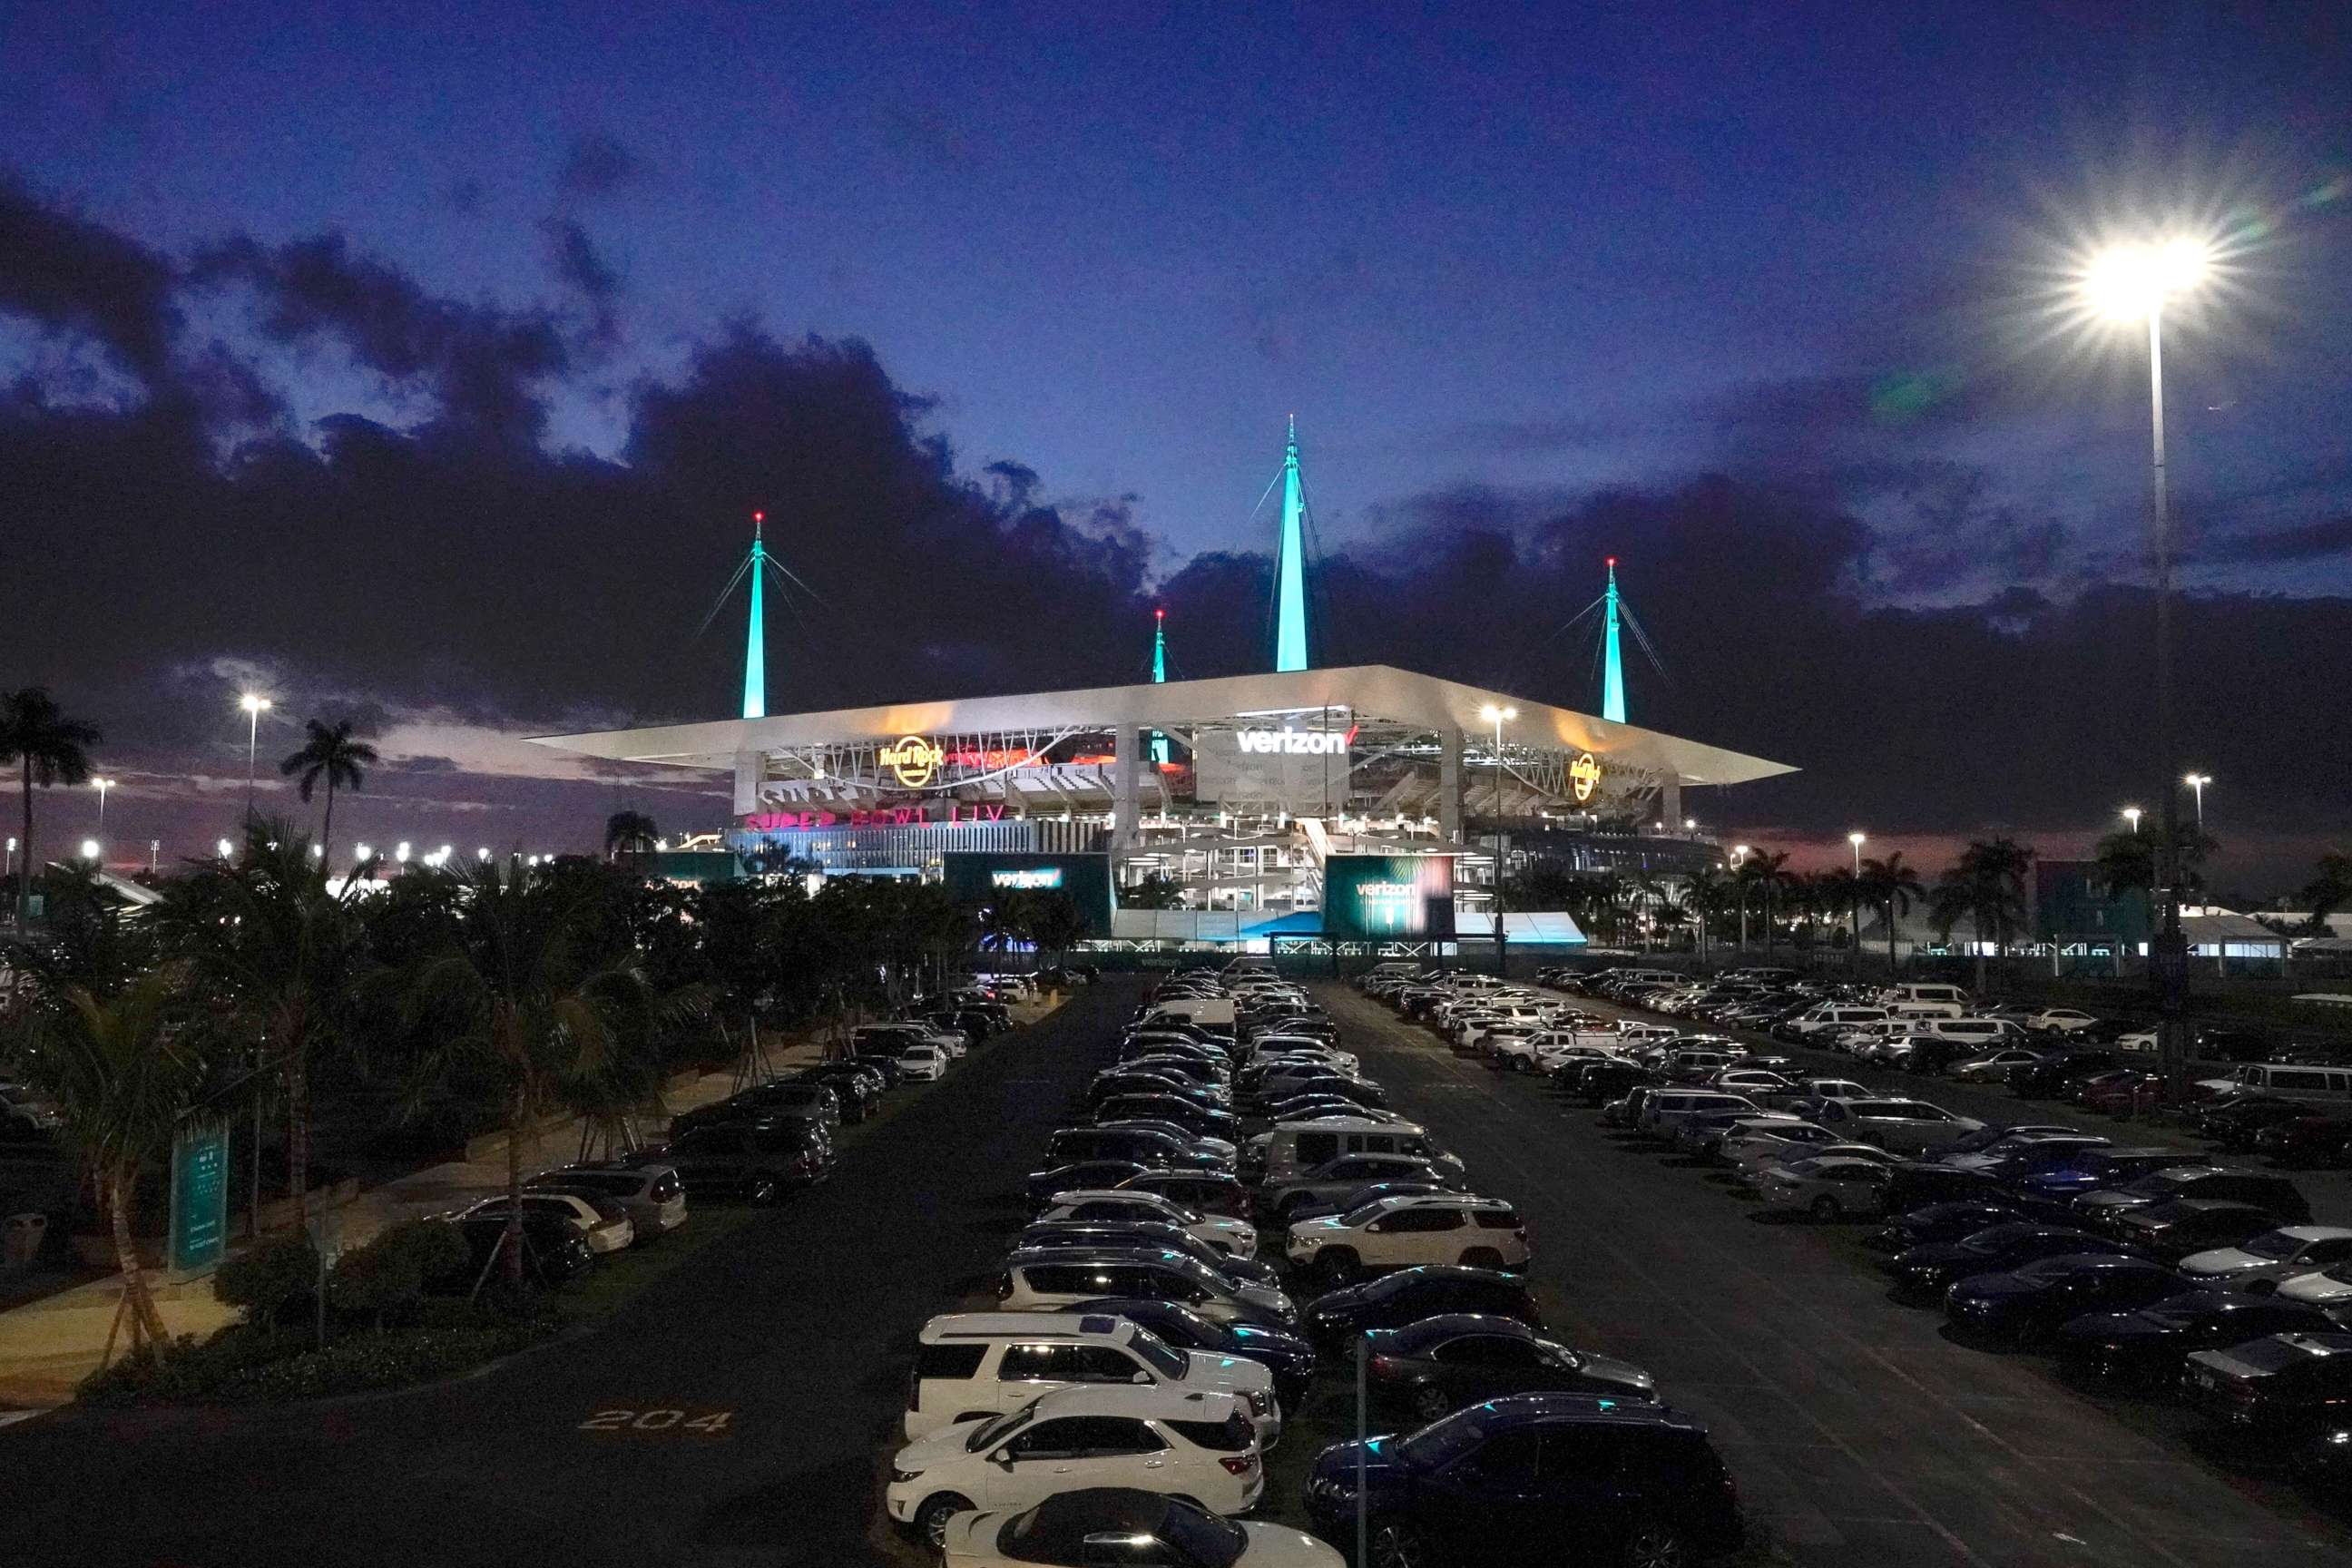 PHOTO: Hard Rock Stadium, site of the NFL Super Bowl 54 football game between the Kansas City Chiefs and the San Francisco 49ers, Jan. 30, 2020, in Miami Gardens, Fla.